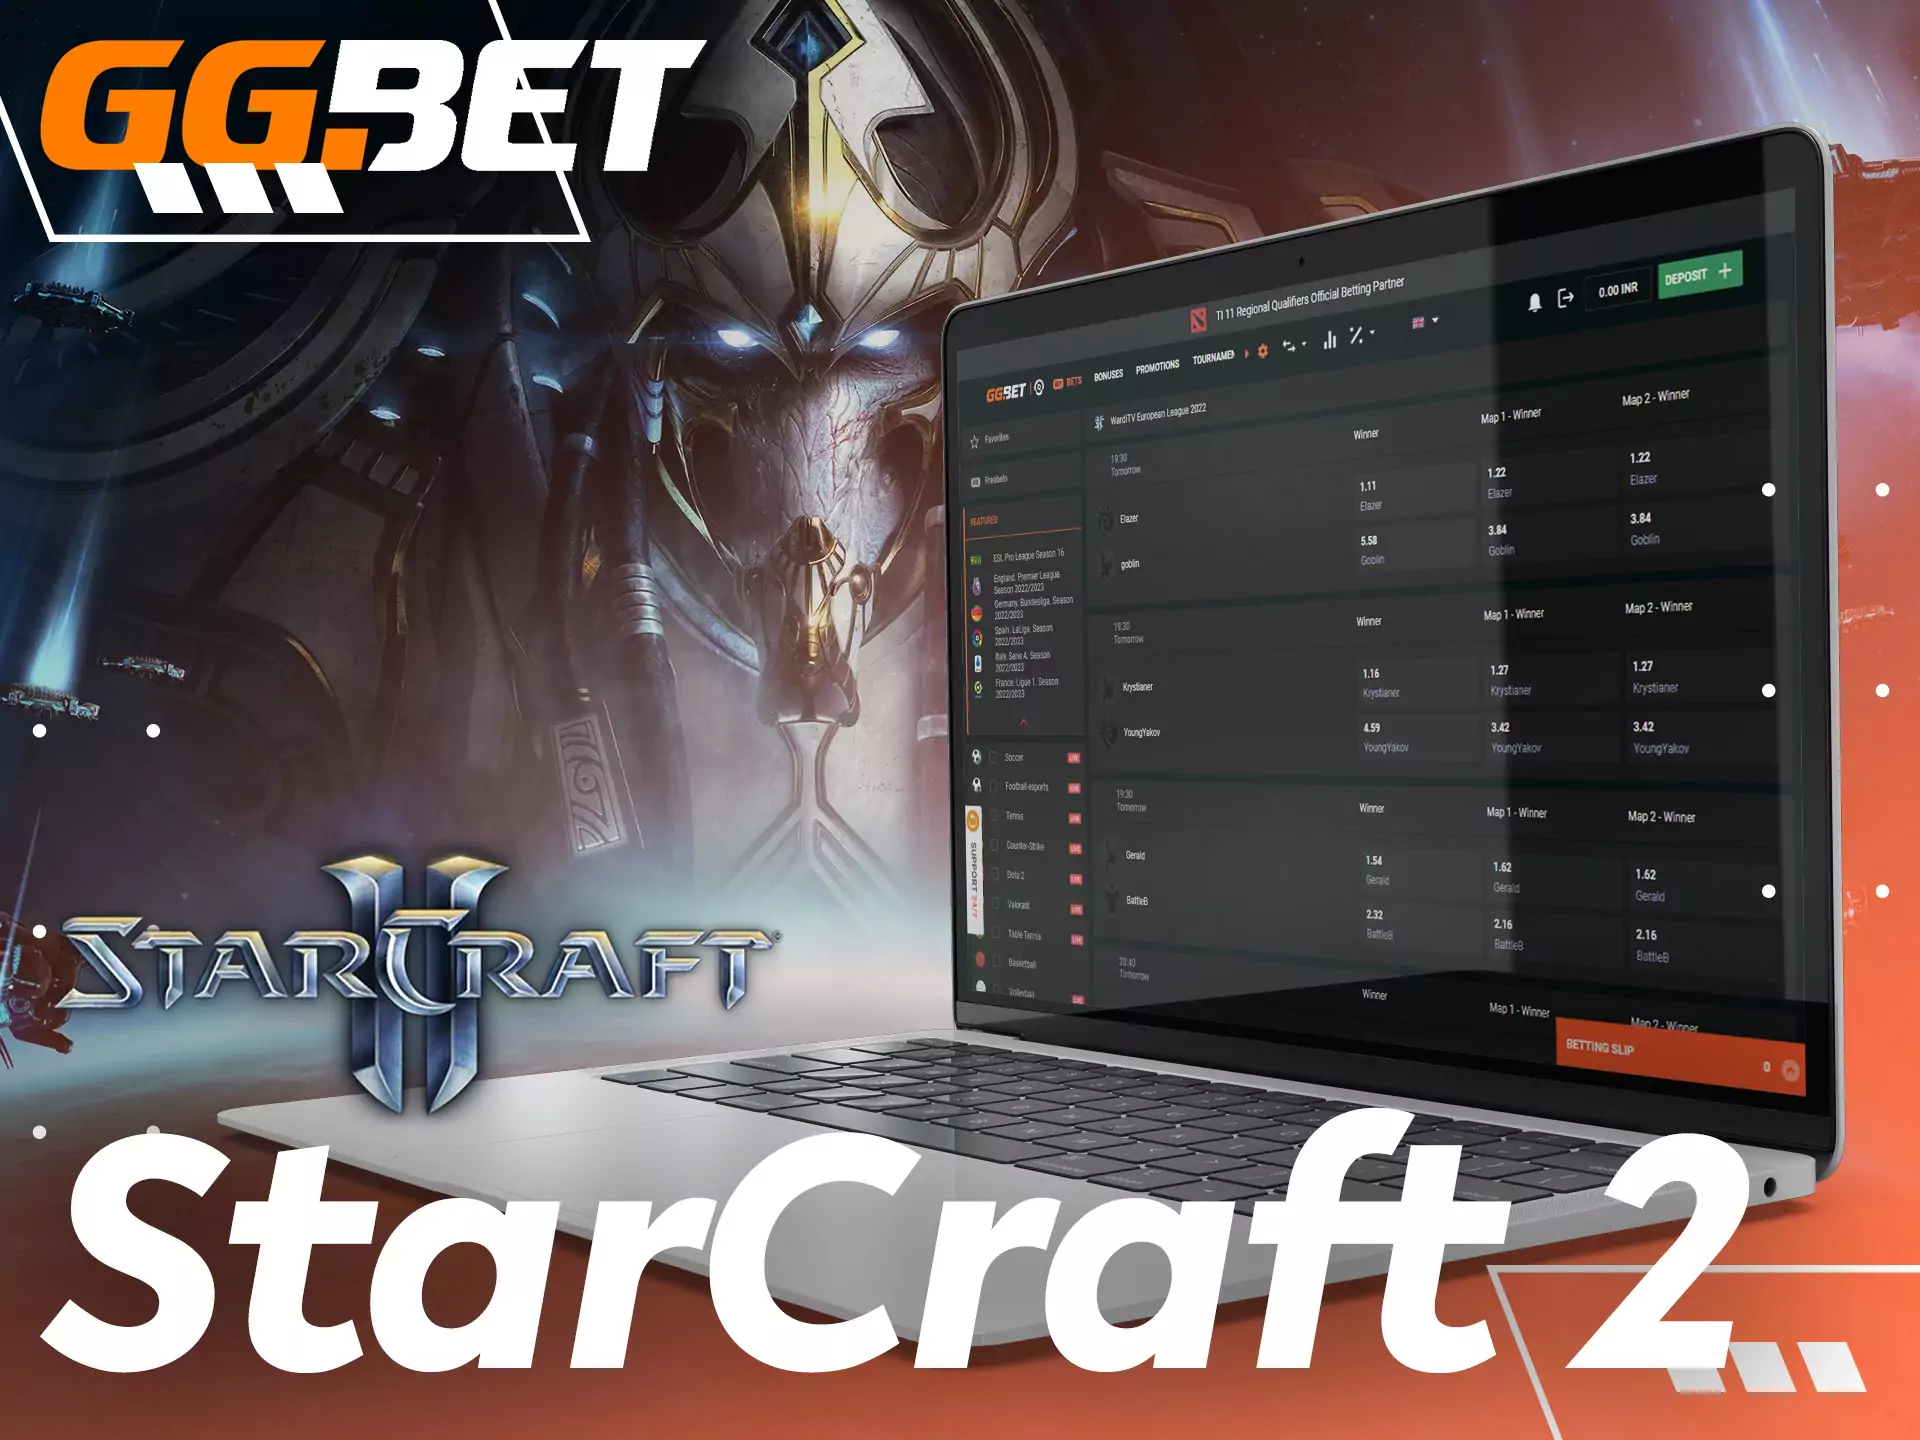 Starcraft 2 tournaments are also presented on GGBet.